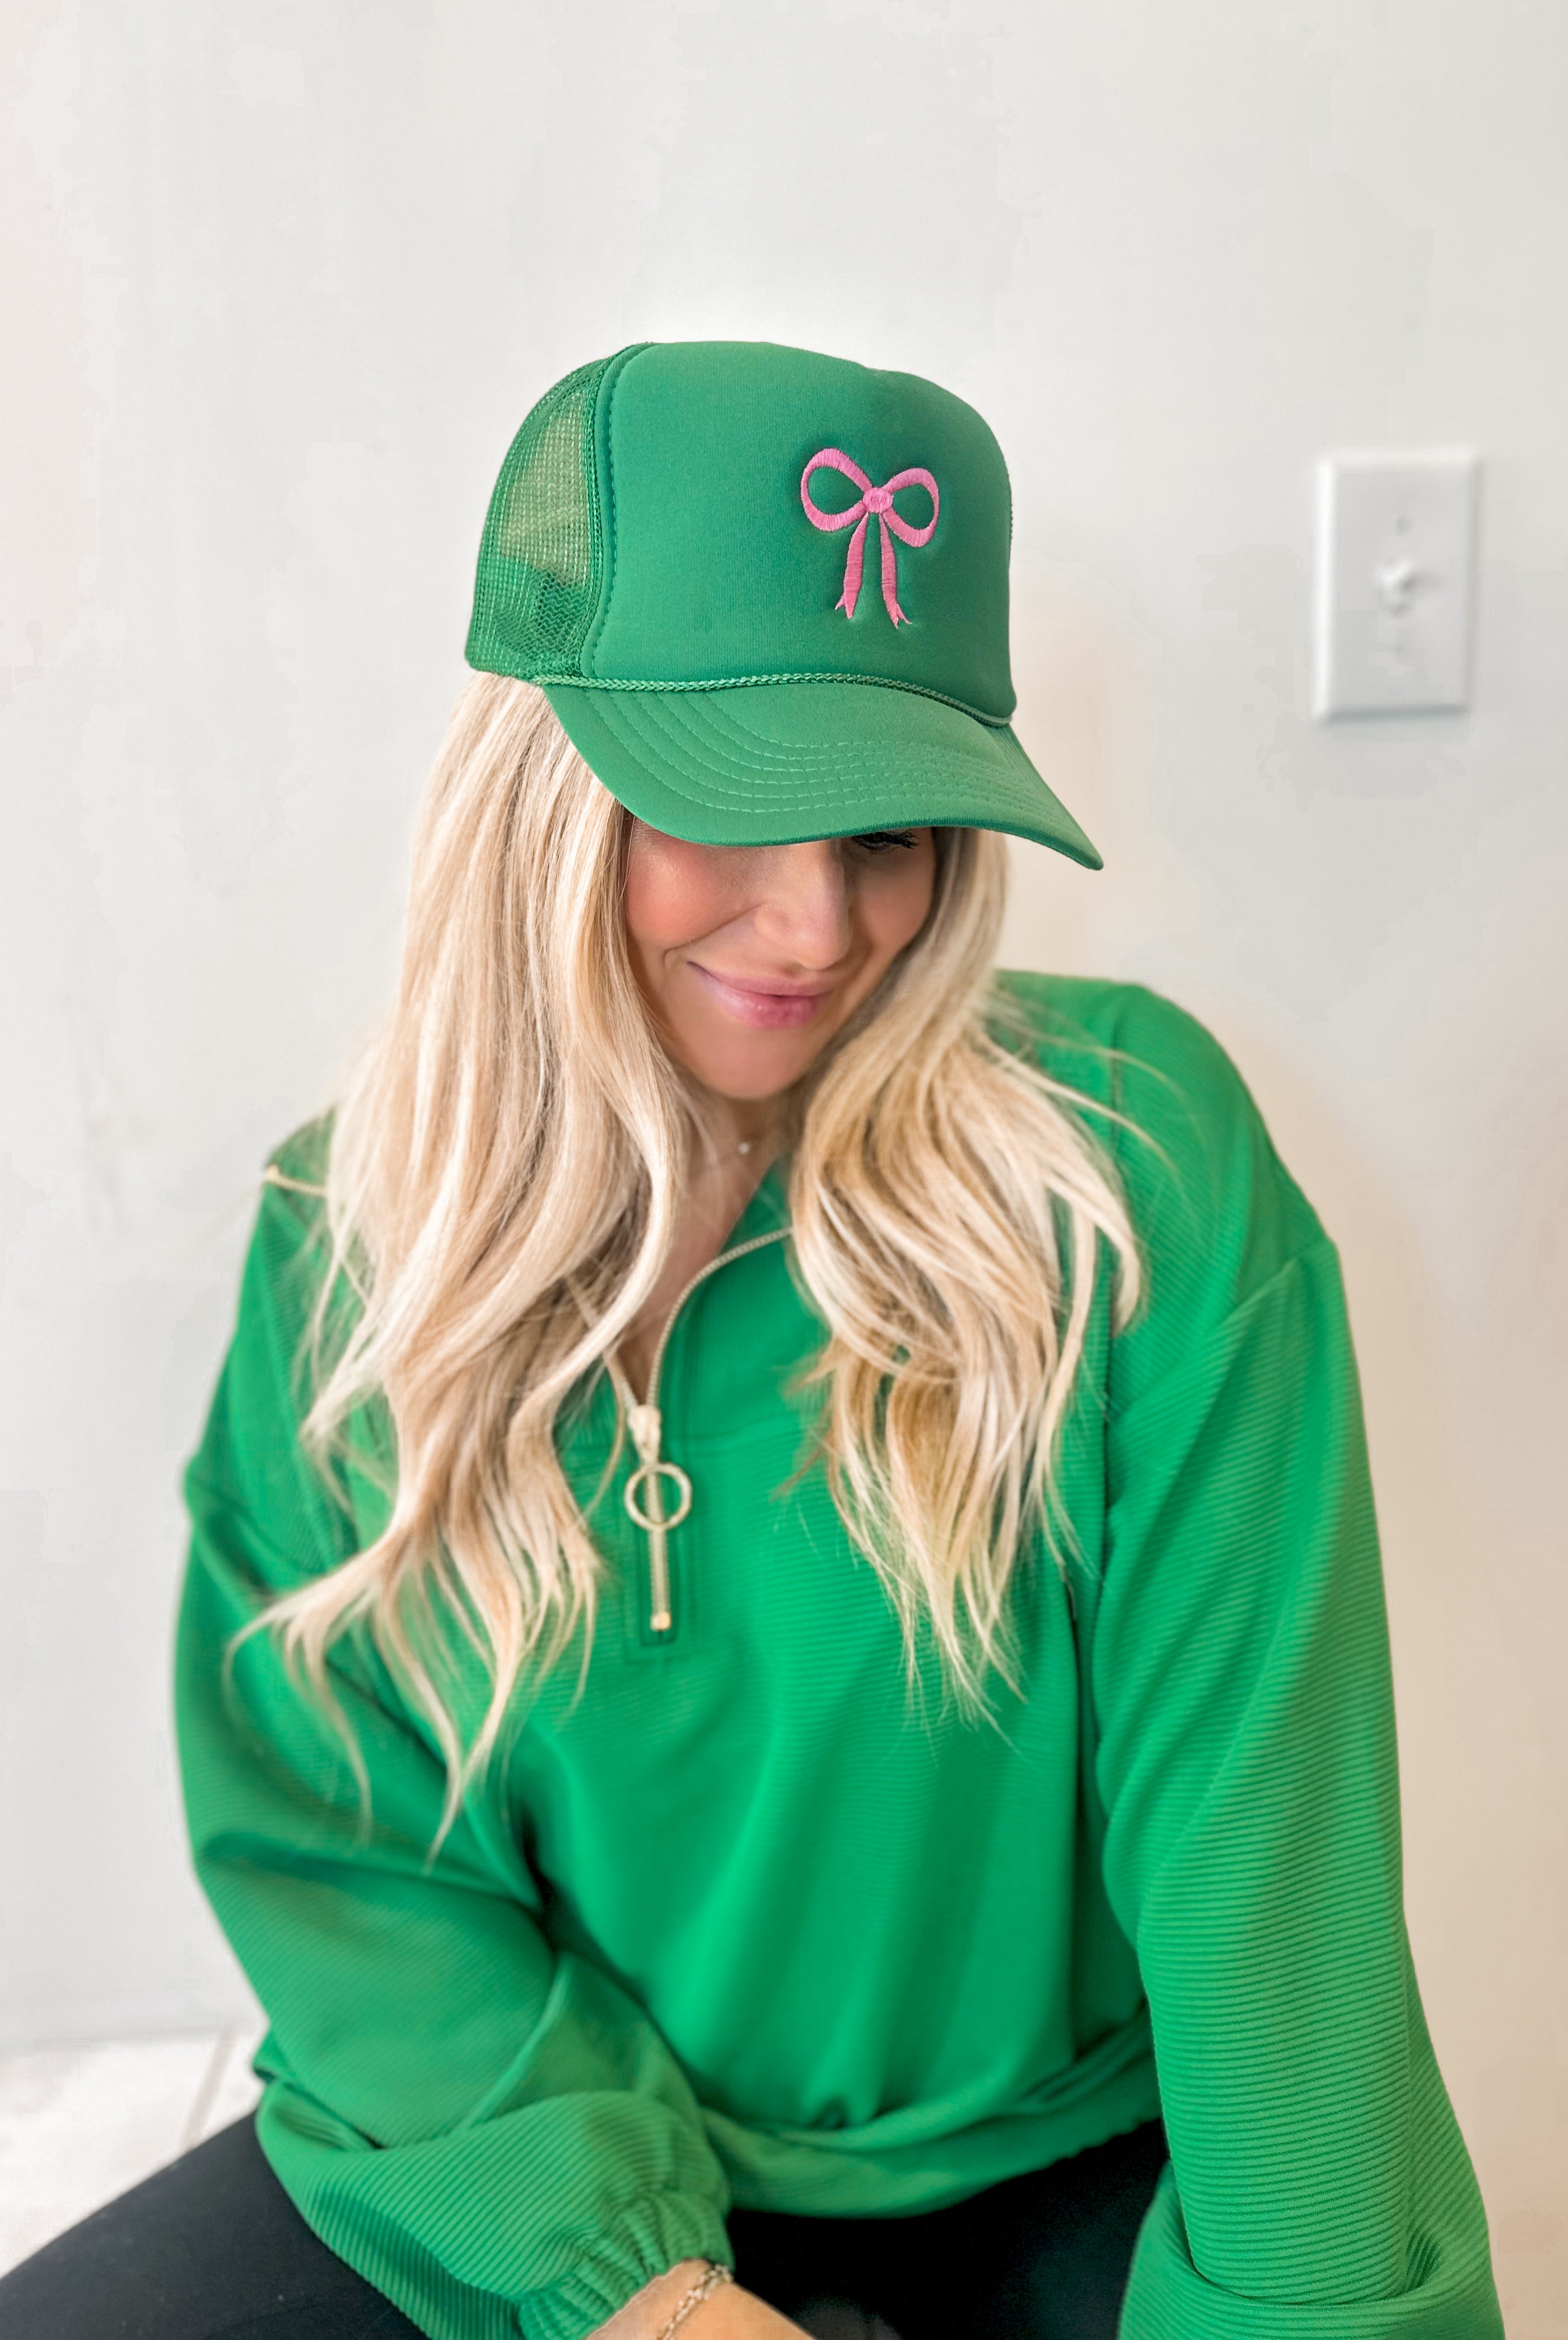 Sweet Bow Comfy Trucker Cap Hat - Be You Boutique